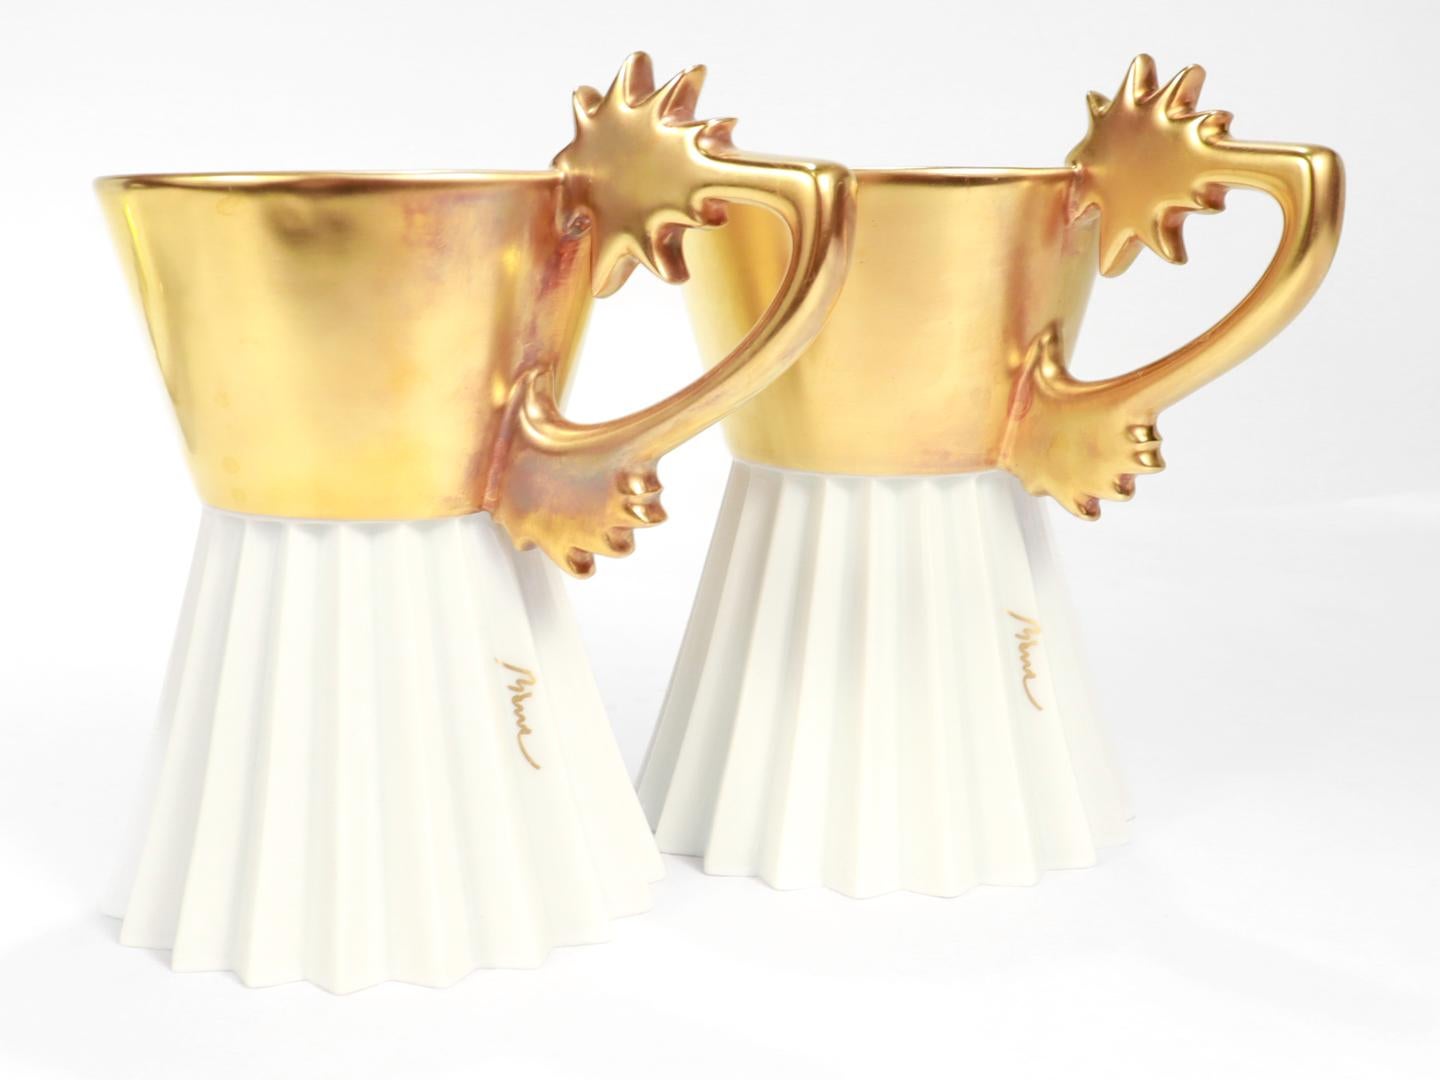 Pair of Rosenthal Studio Linie Gilt Porcelain No. 23 Cup & Saucers by Otto Piene For Sale 9